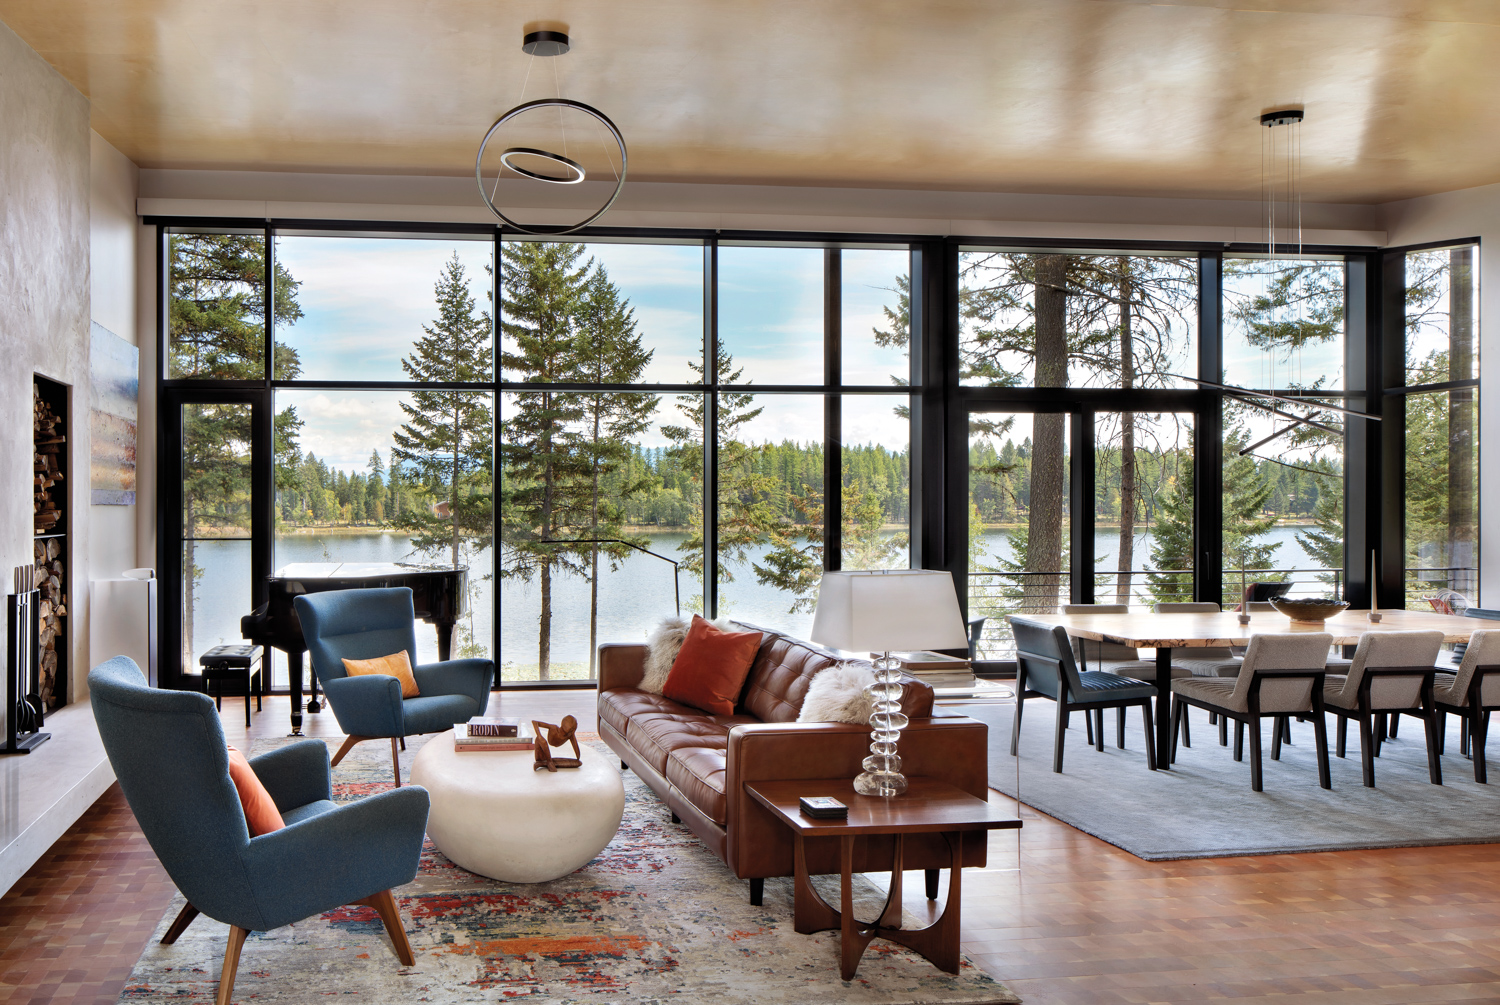 Large windows overlook a forested and water views.